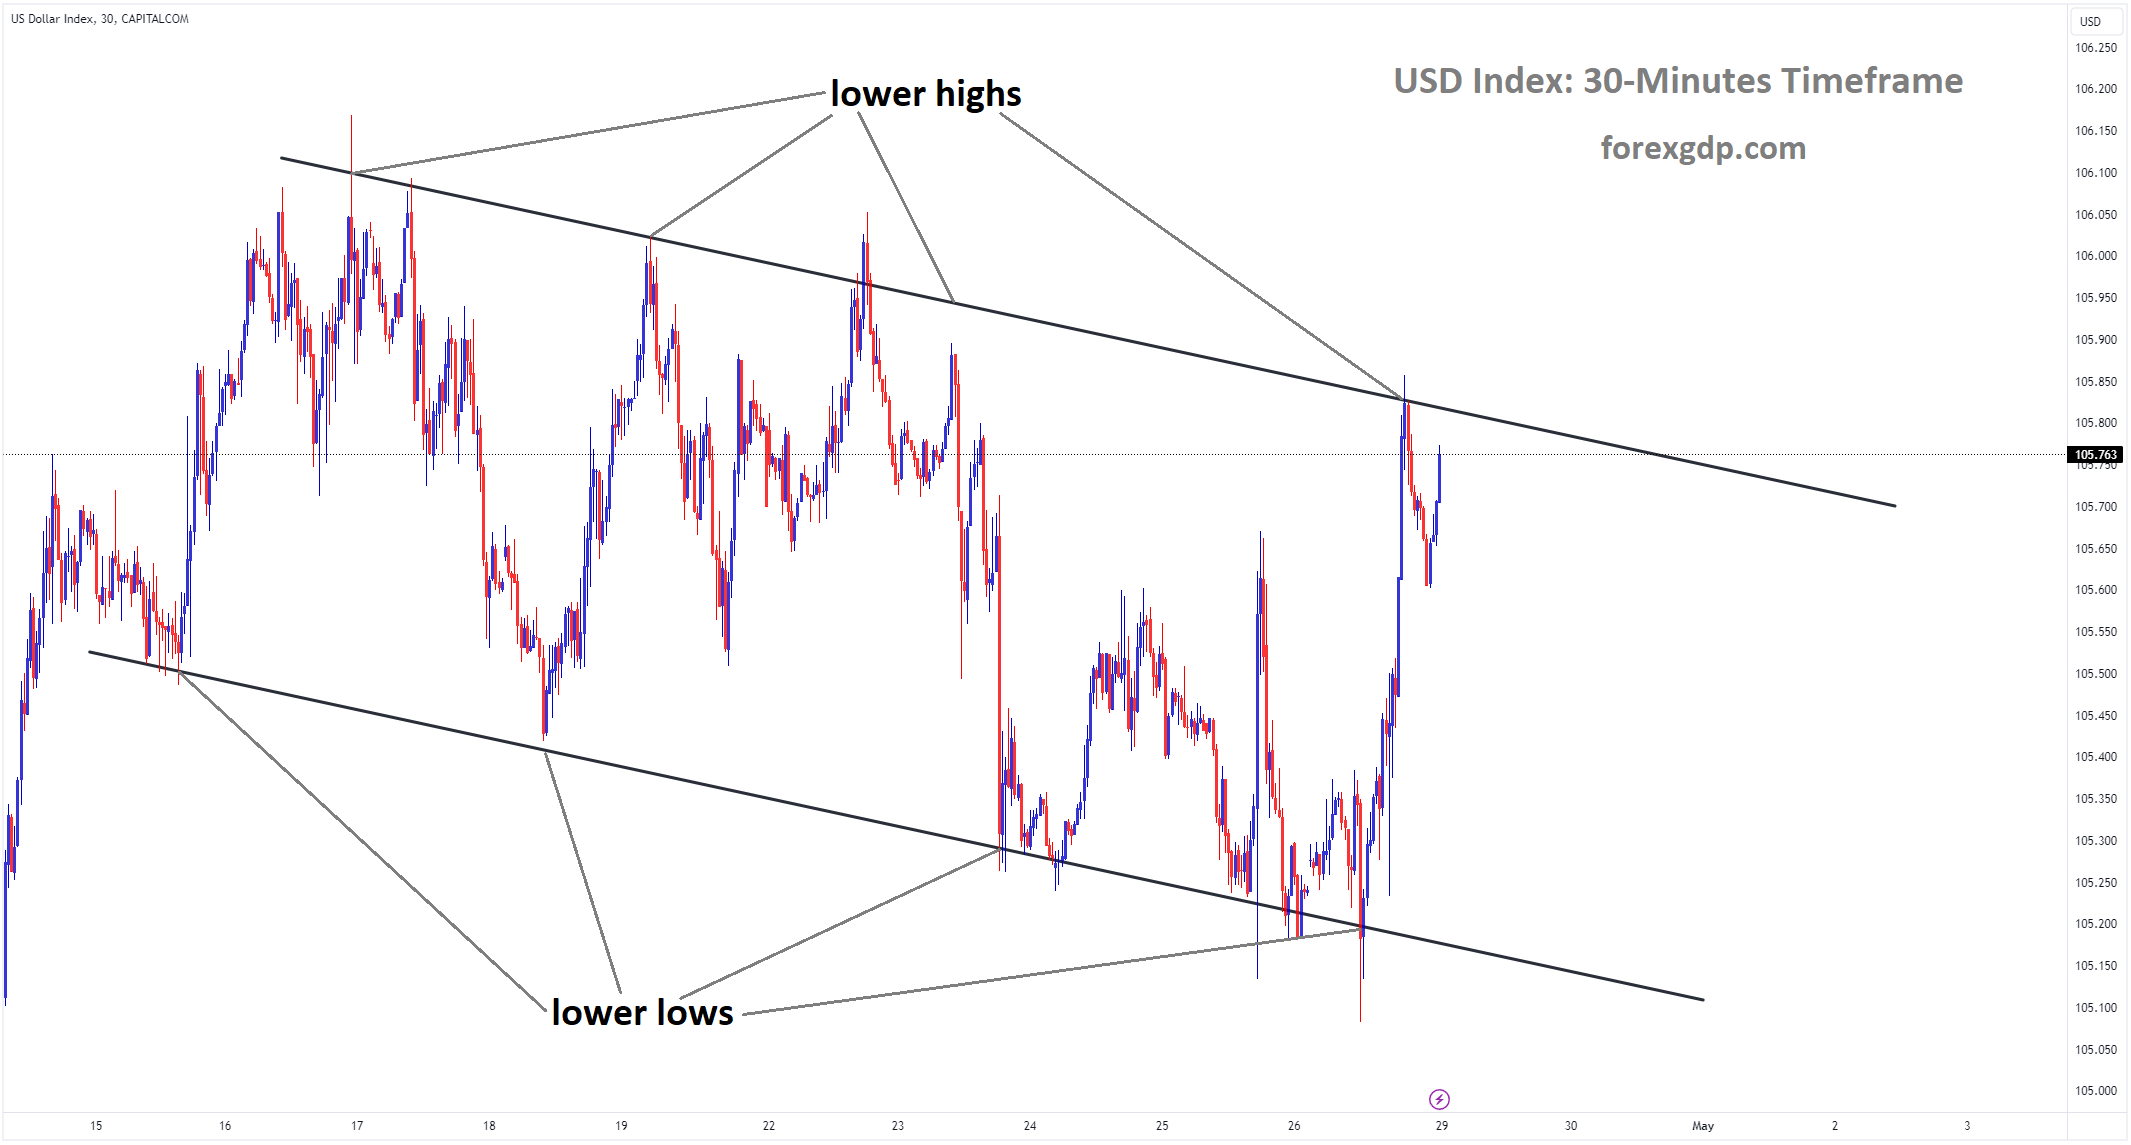 USD Index is moving in Descending channel and market has reached lower high area of the channel